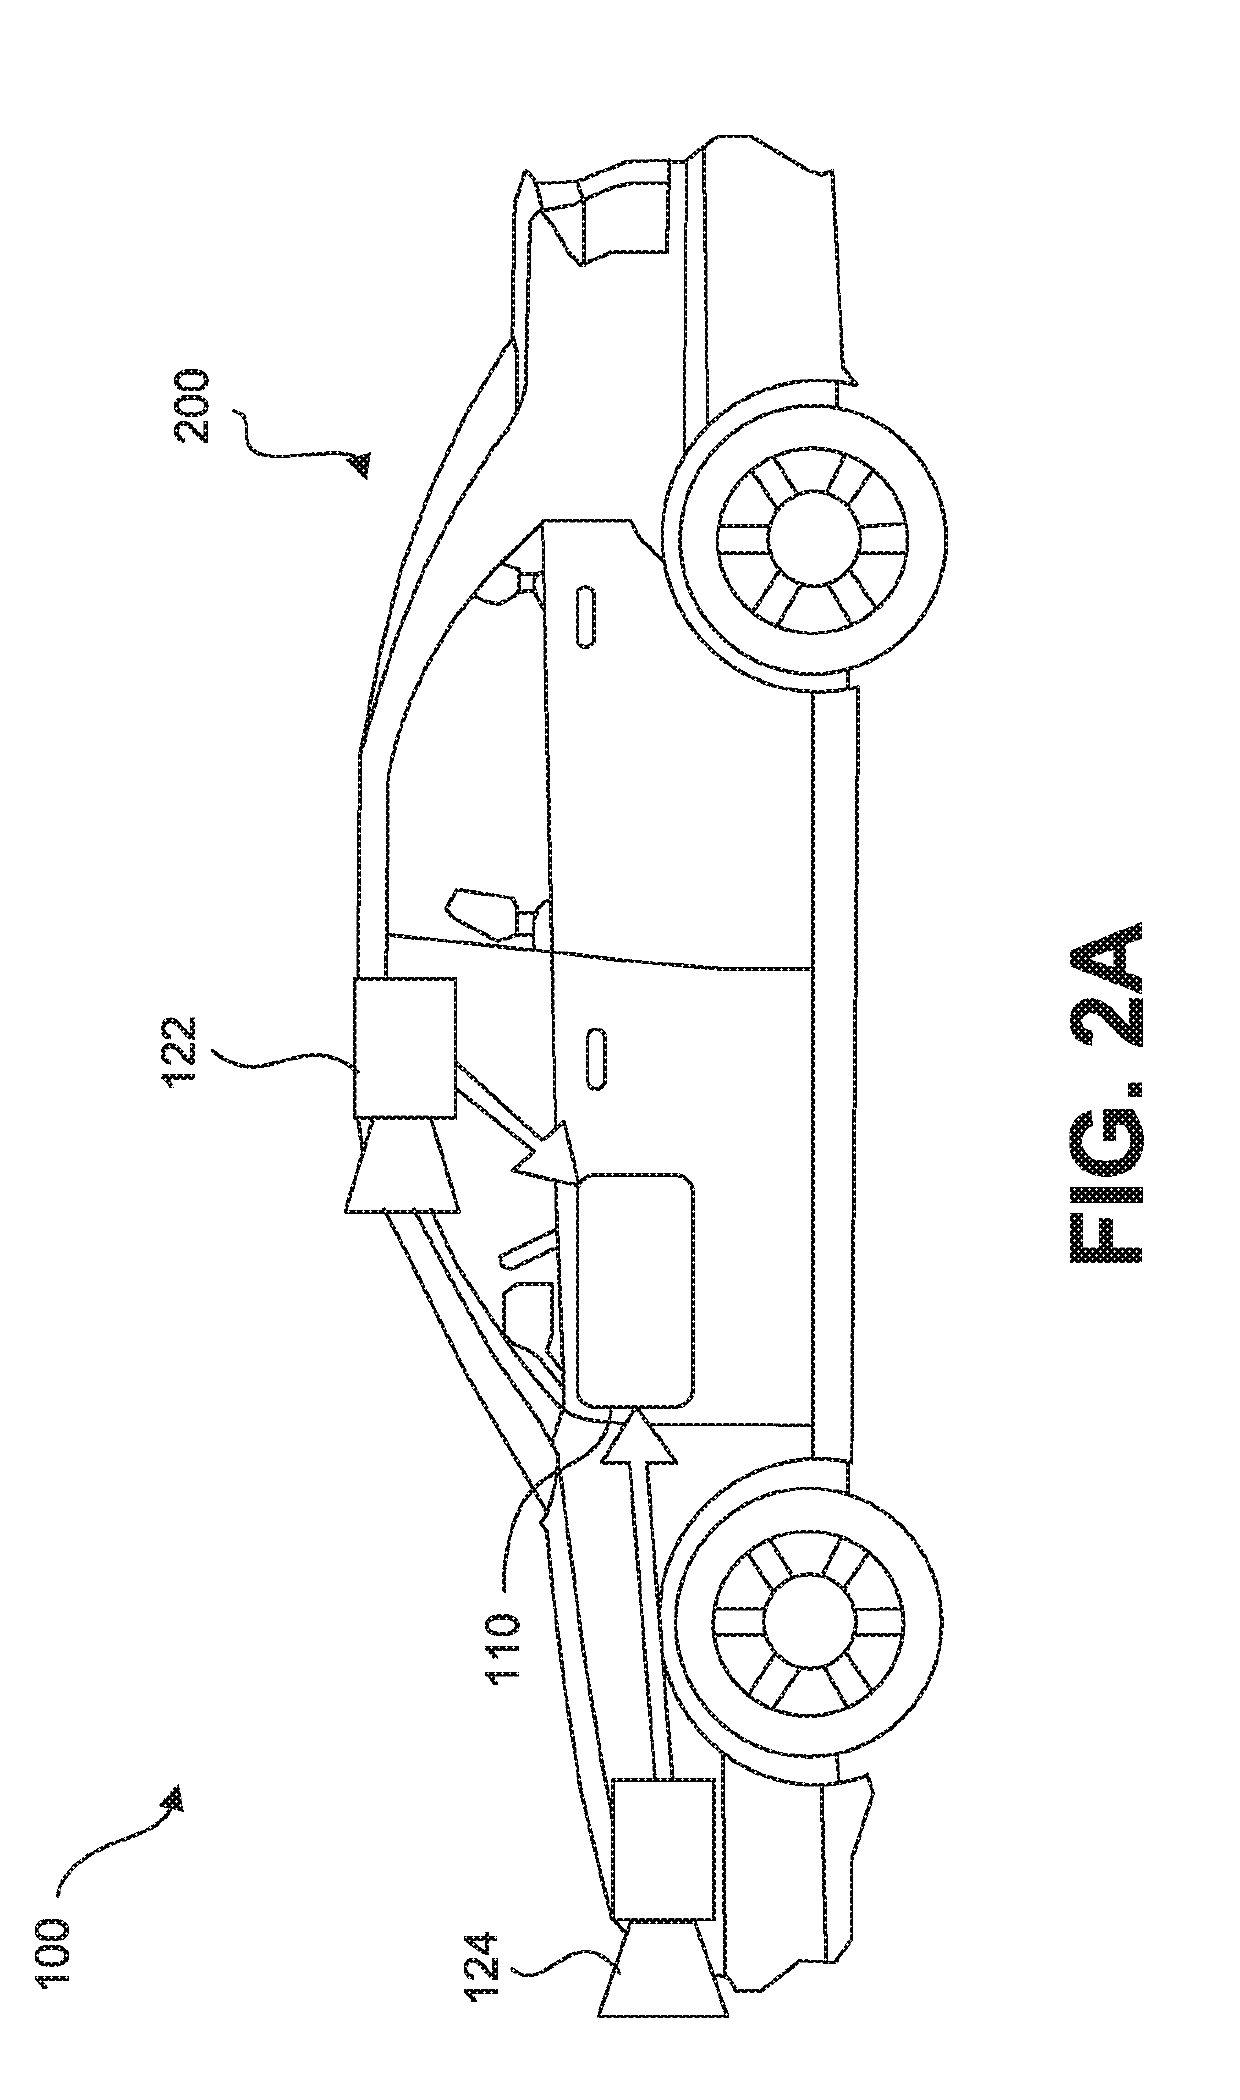 Systems and methods for navigating a vehicle